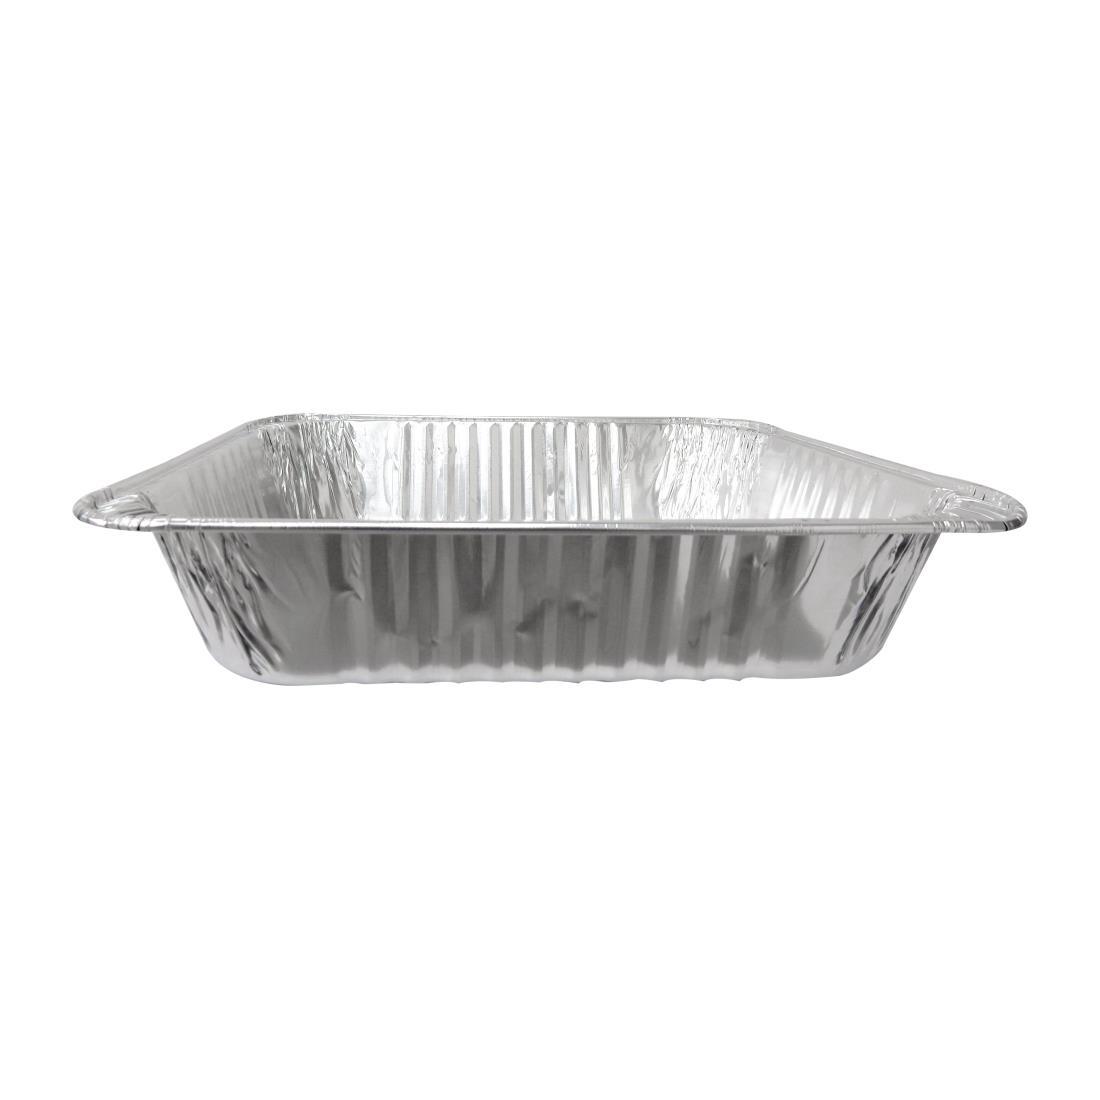 Deep Foil Containers (Pack of 200) - FJ853  - 2